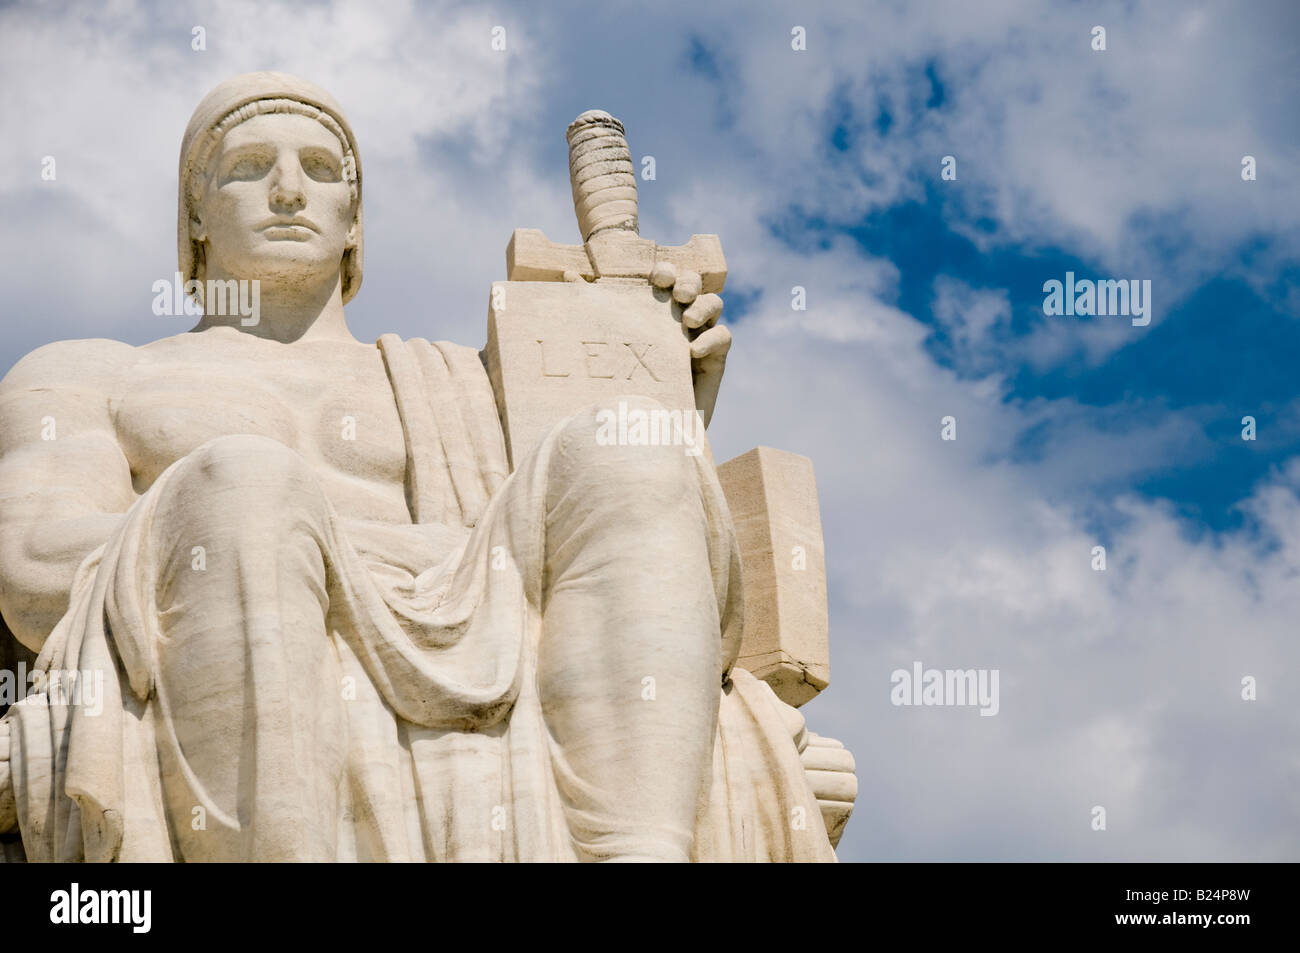 The statue called The Authority of Law at the entrance to the US Supreme Court in Washington DC Stock Photo